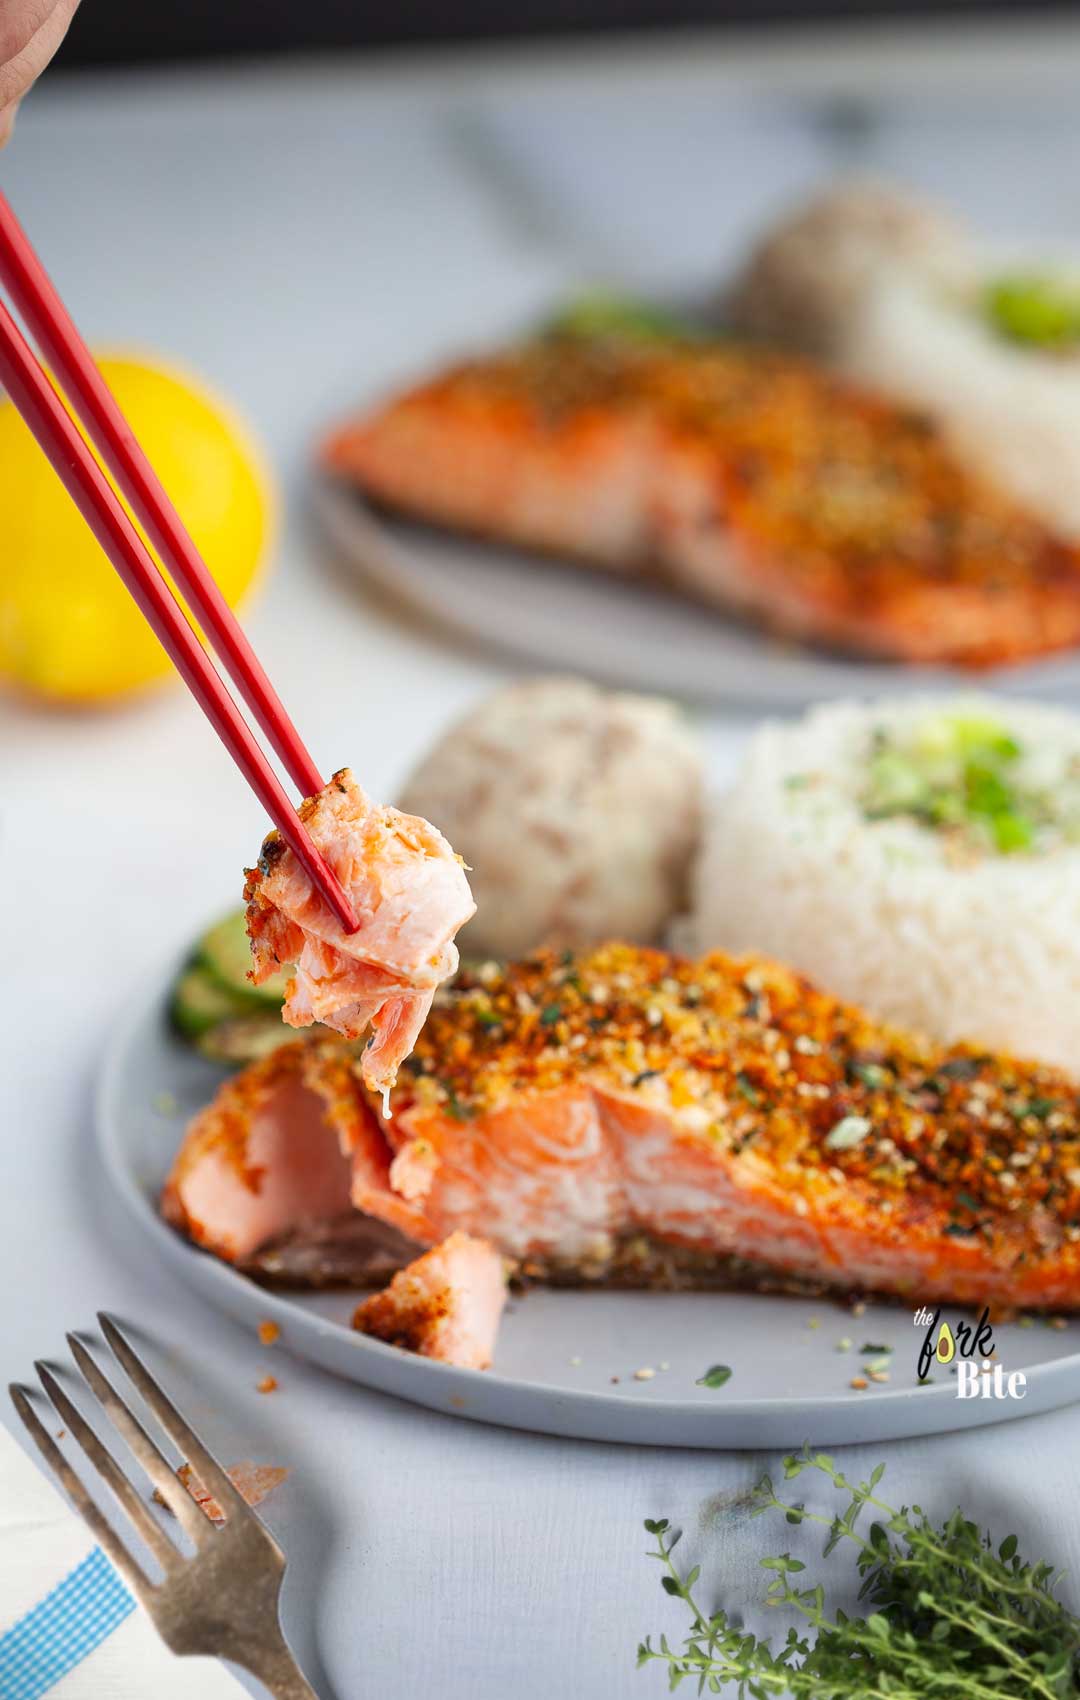 To check if your salmon is ready, insert a fork into the thickest part of the fillet. It is done as soon as the salmon flakes easily and its center is no longer pink or translucent.